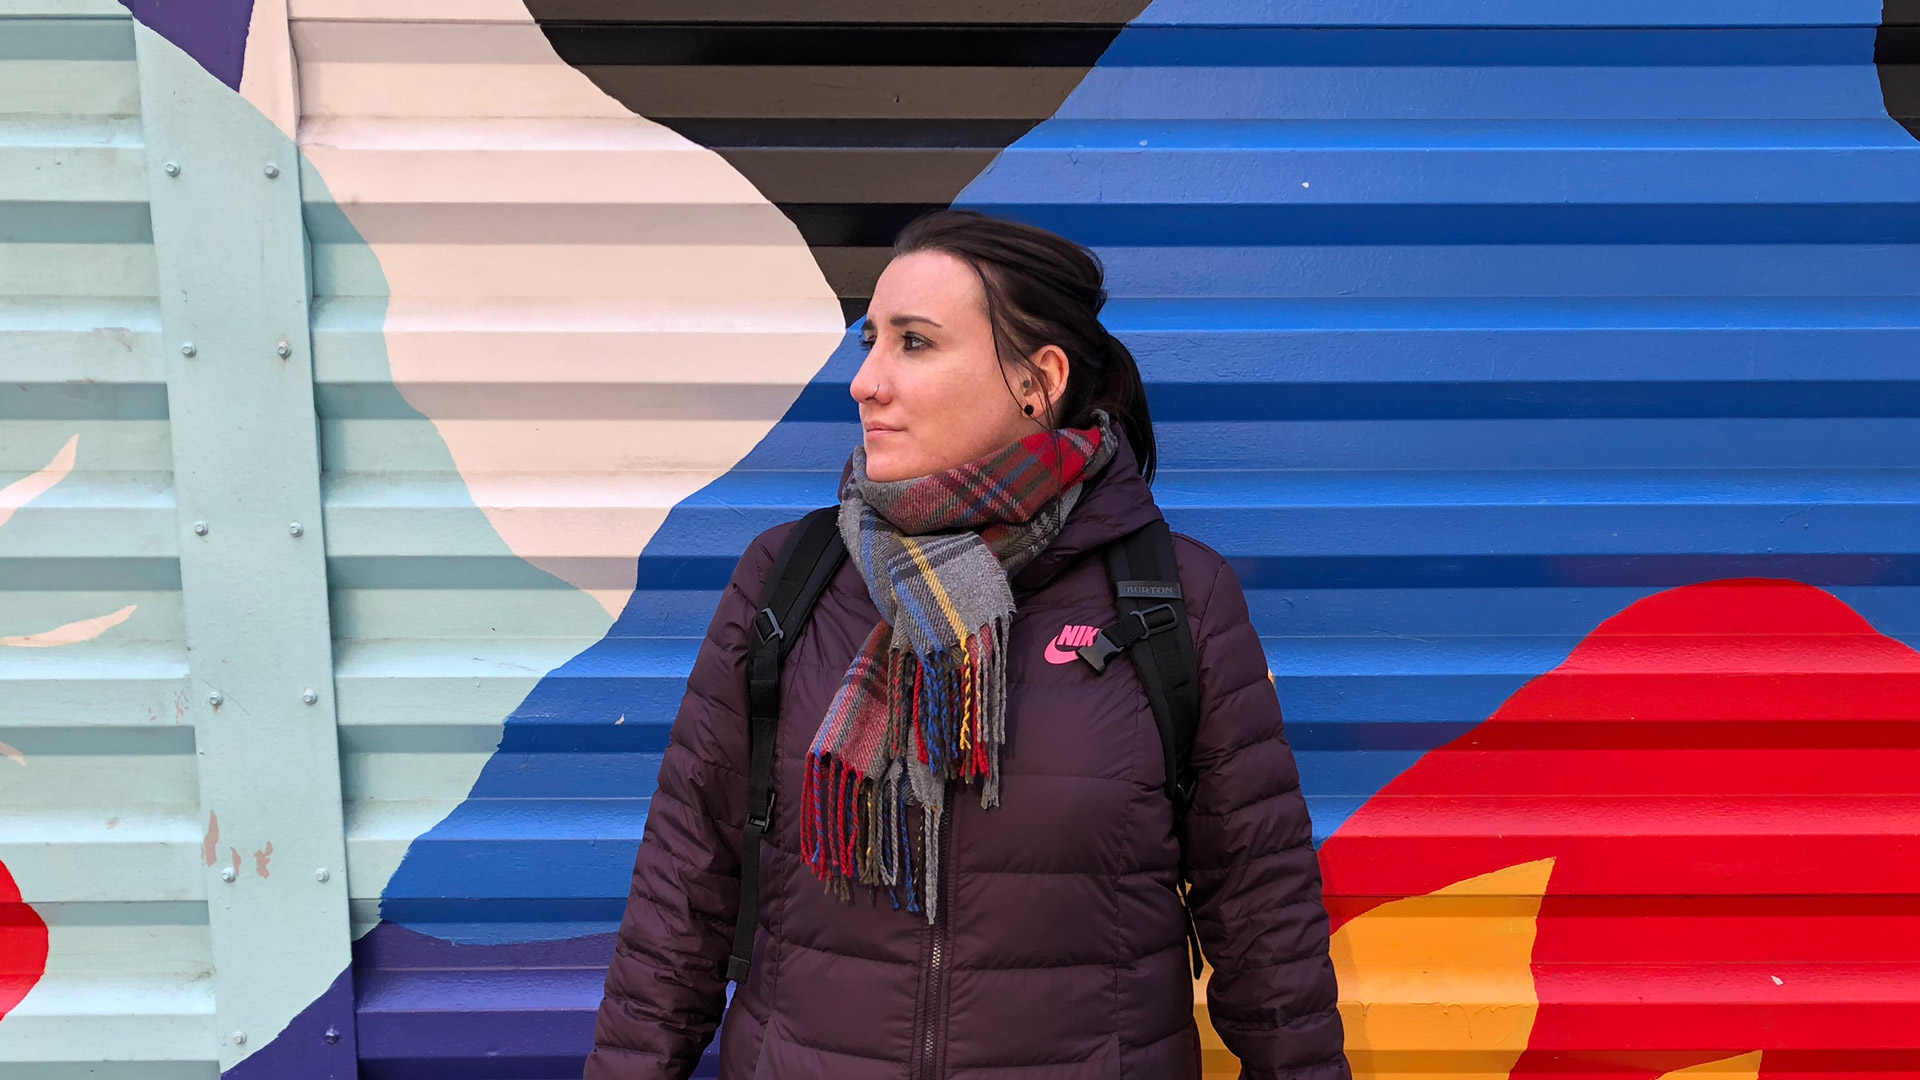 Angela Roche stood in front of colourful street art in New York. It&#39;s November and she is wearing a duvet jacket and a scarf.